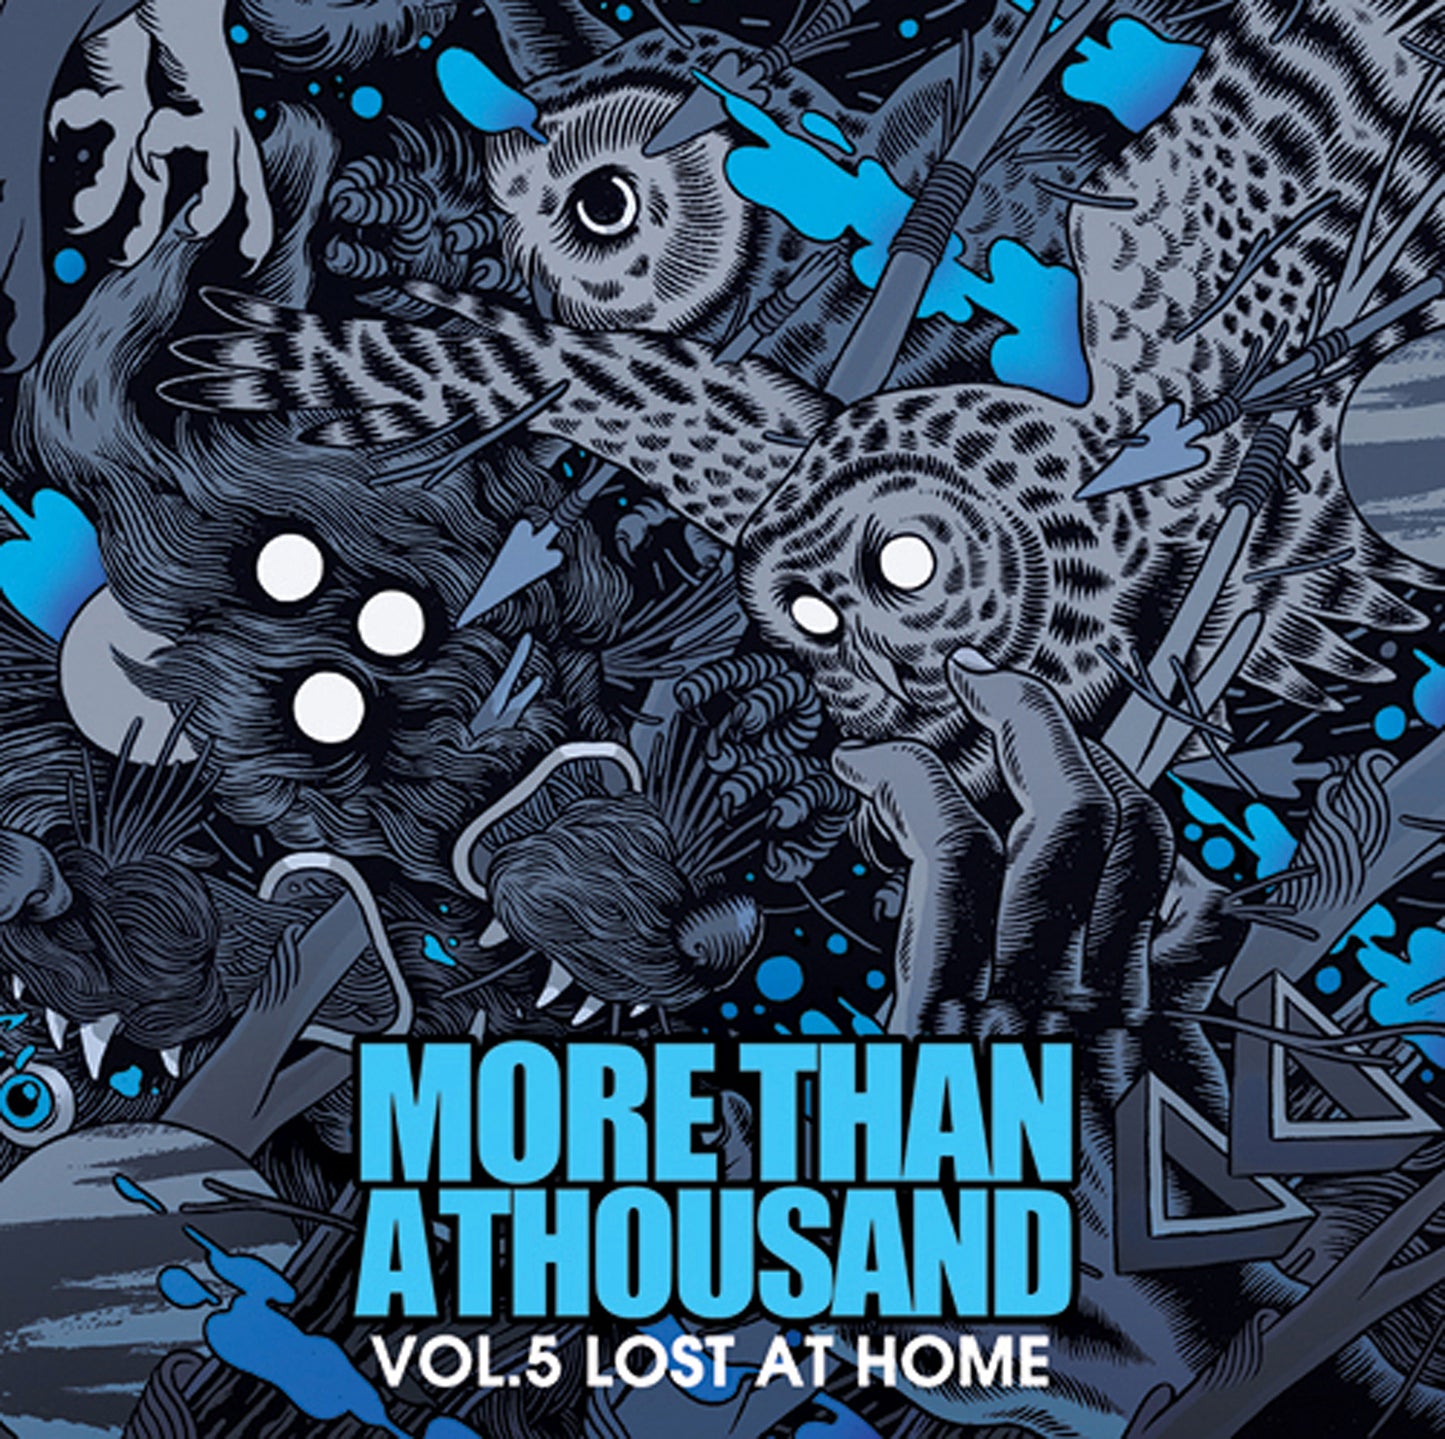 More Than A Thousand "Vol. 5 - Lost At Home" CD